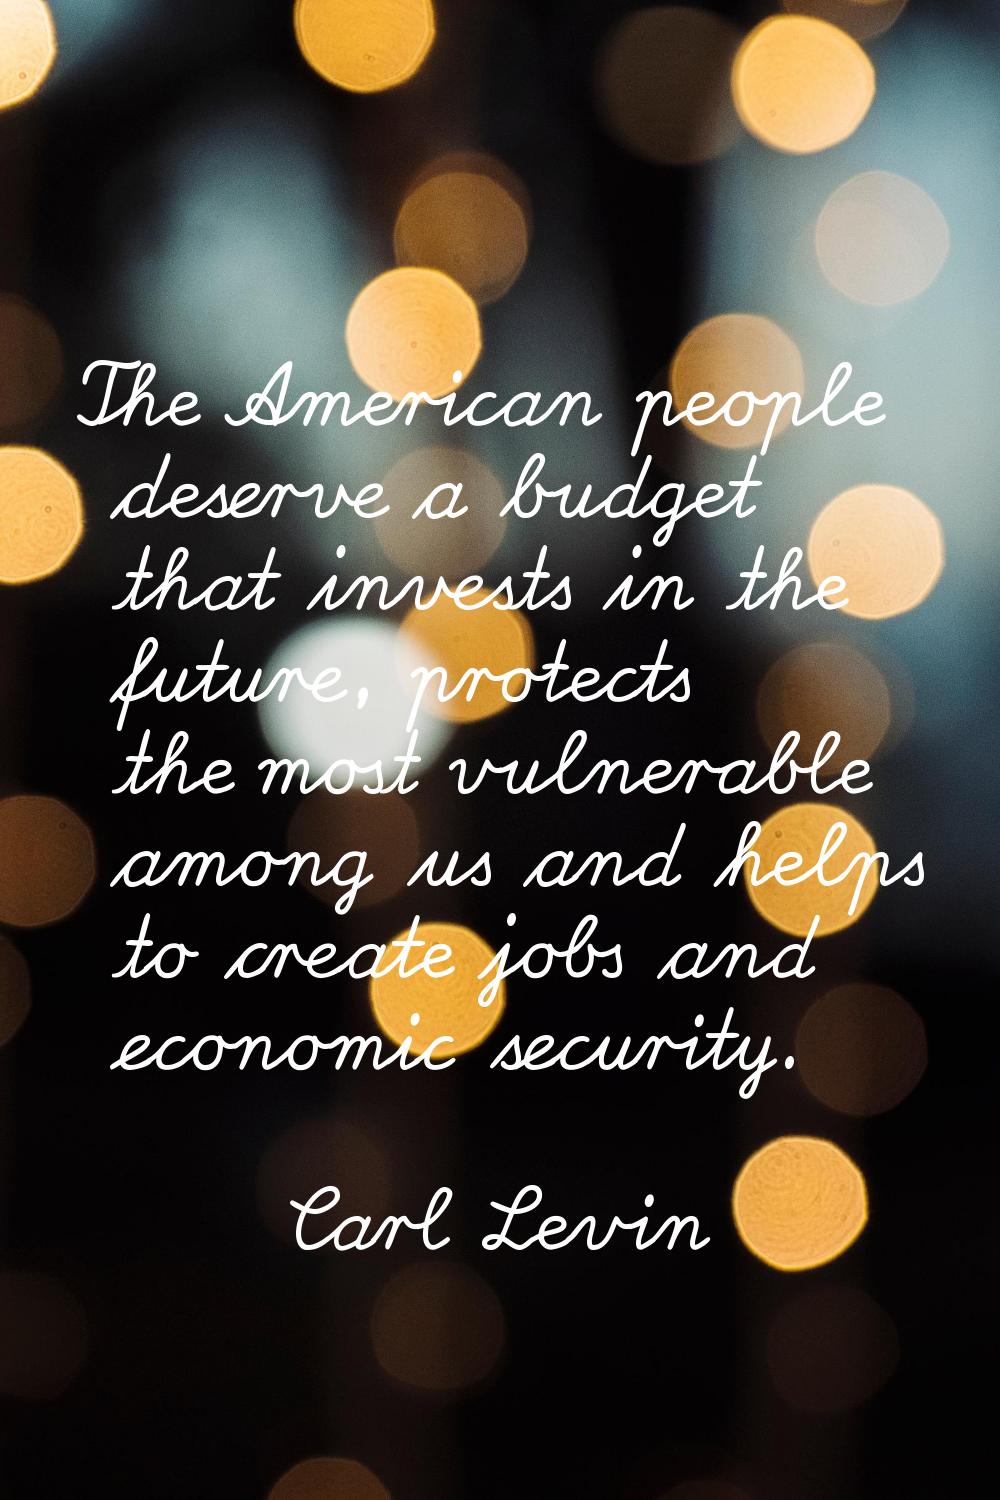 The American people deserve a budget that invests in the future, protects the most vulnerable among